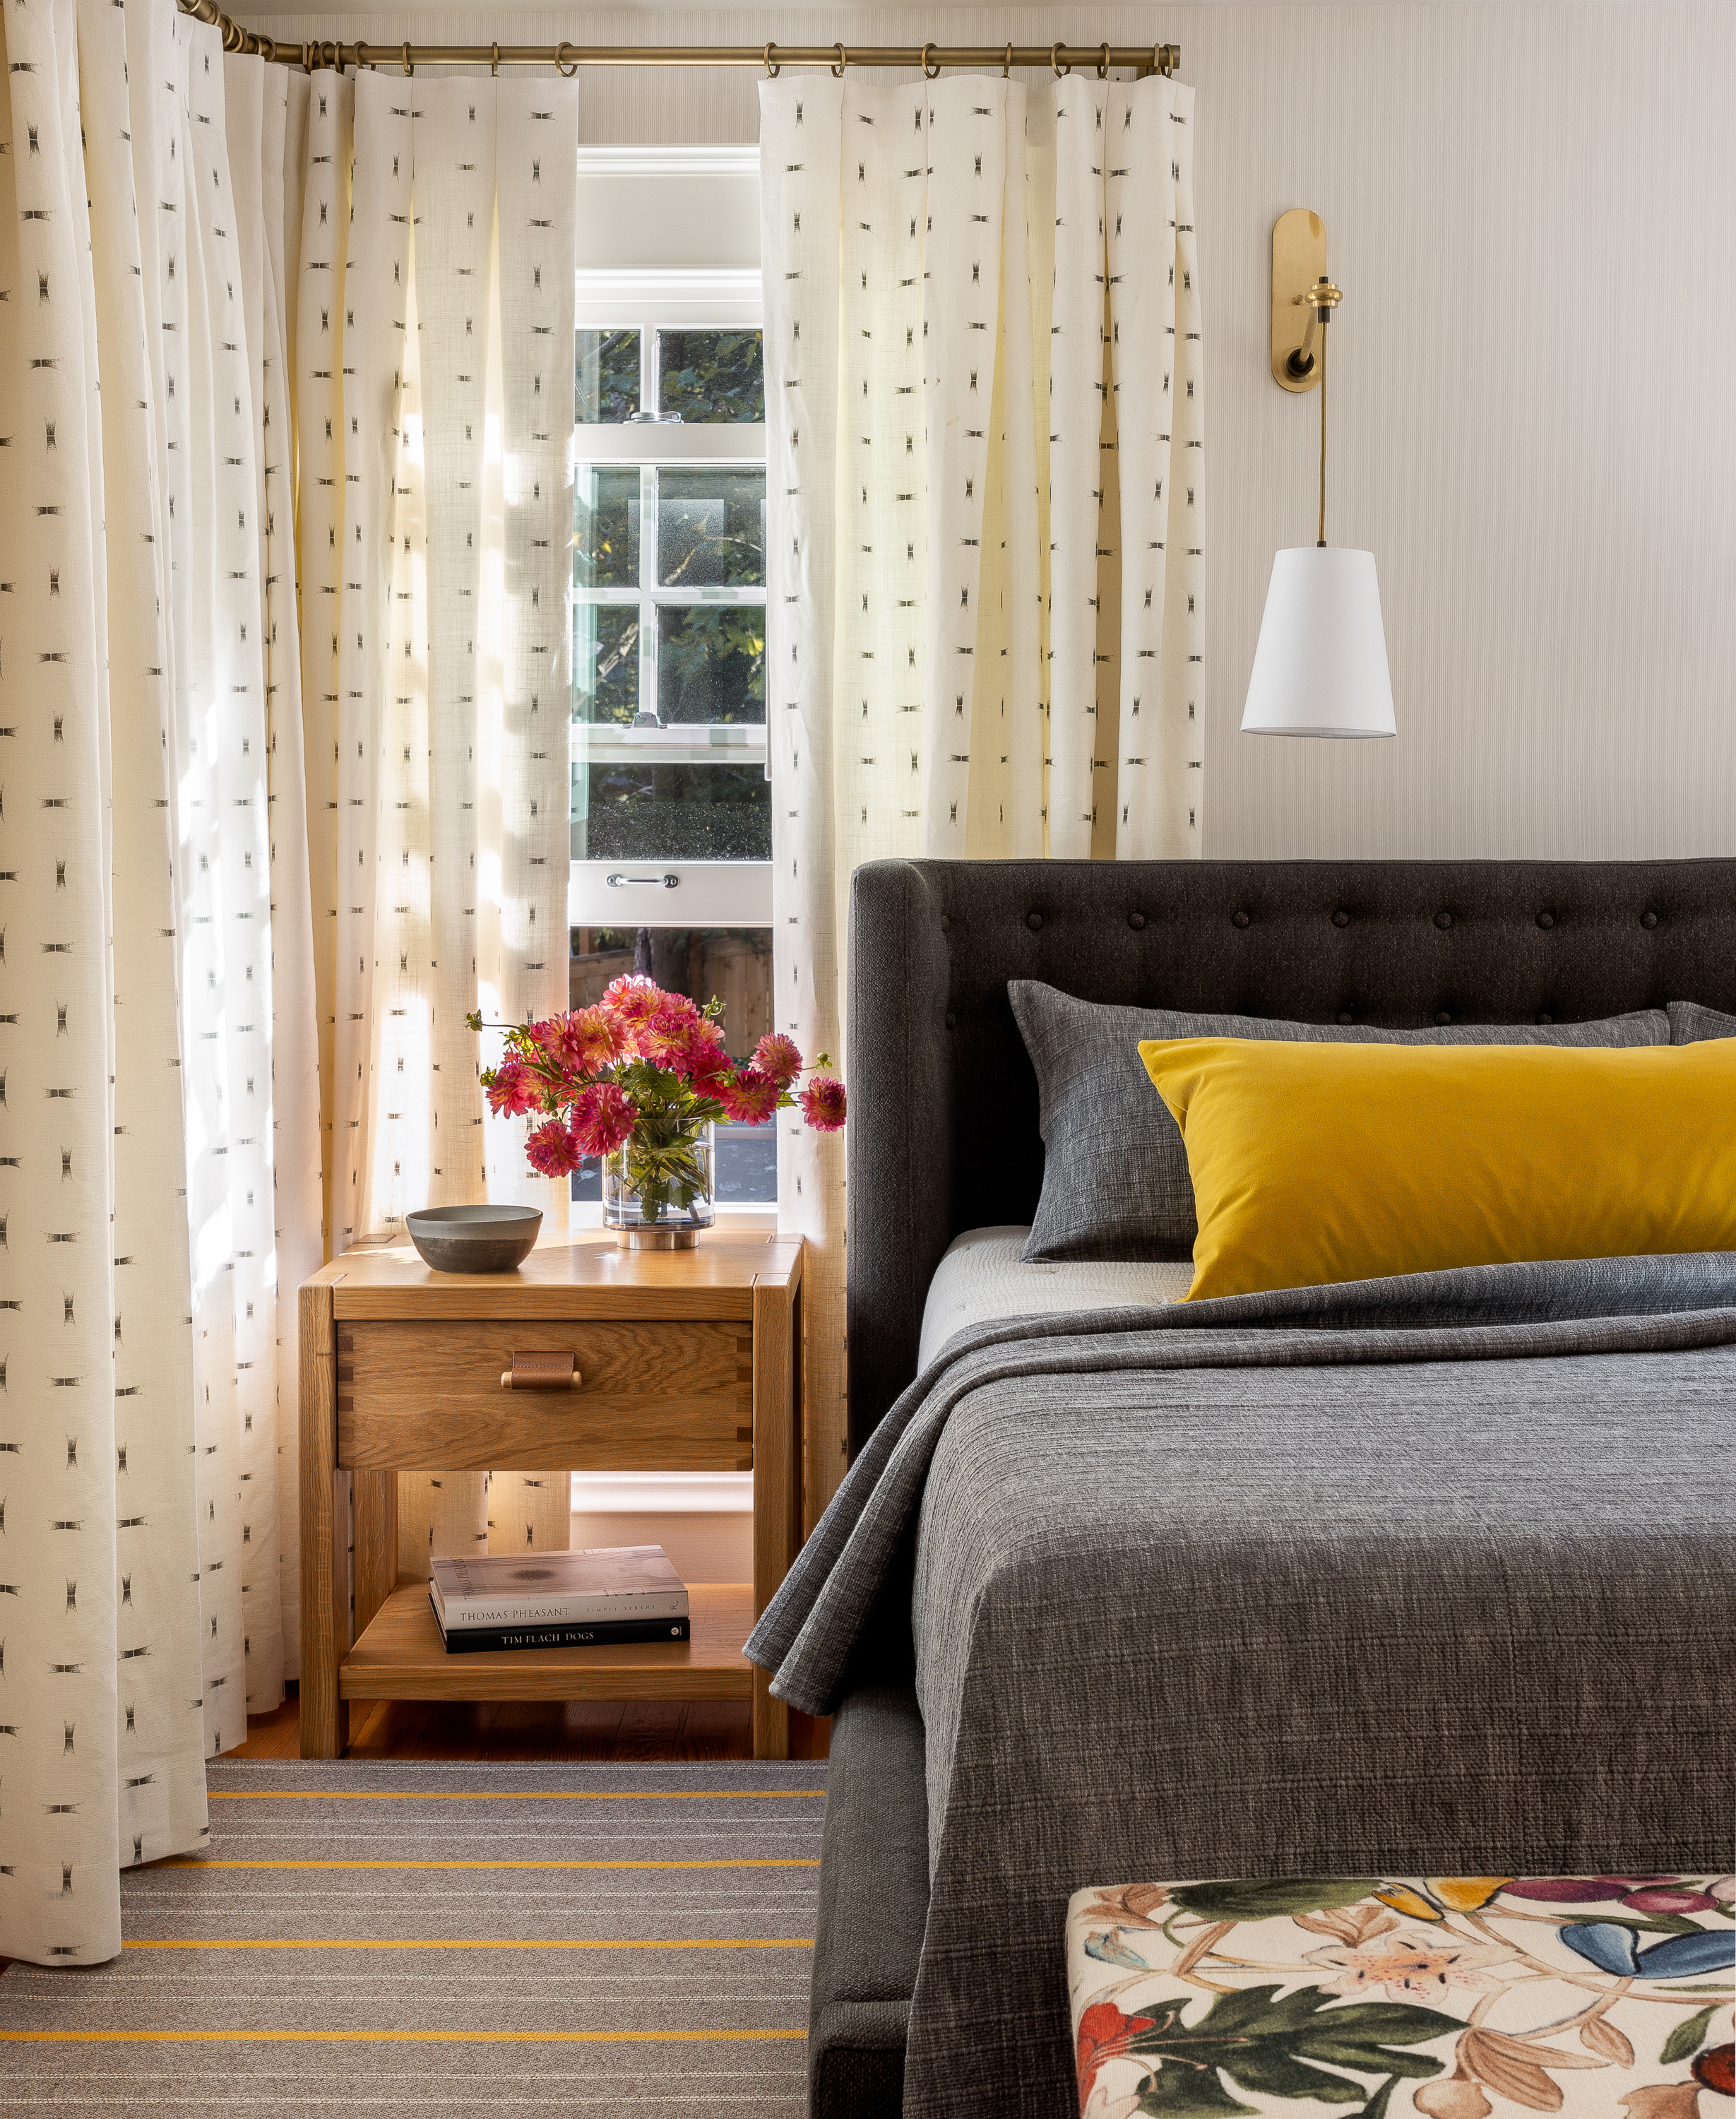 A cheerful and sophisticated guest bedroom.